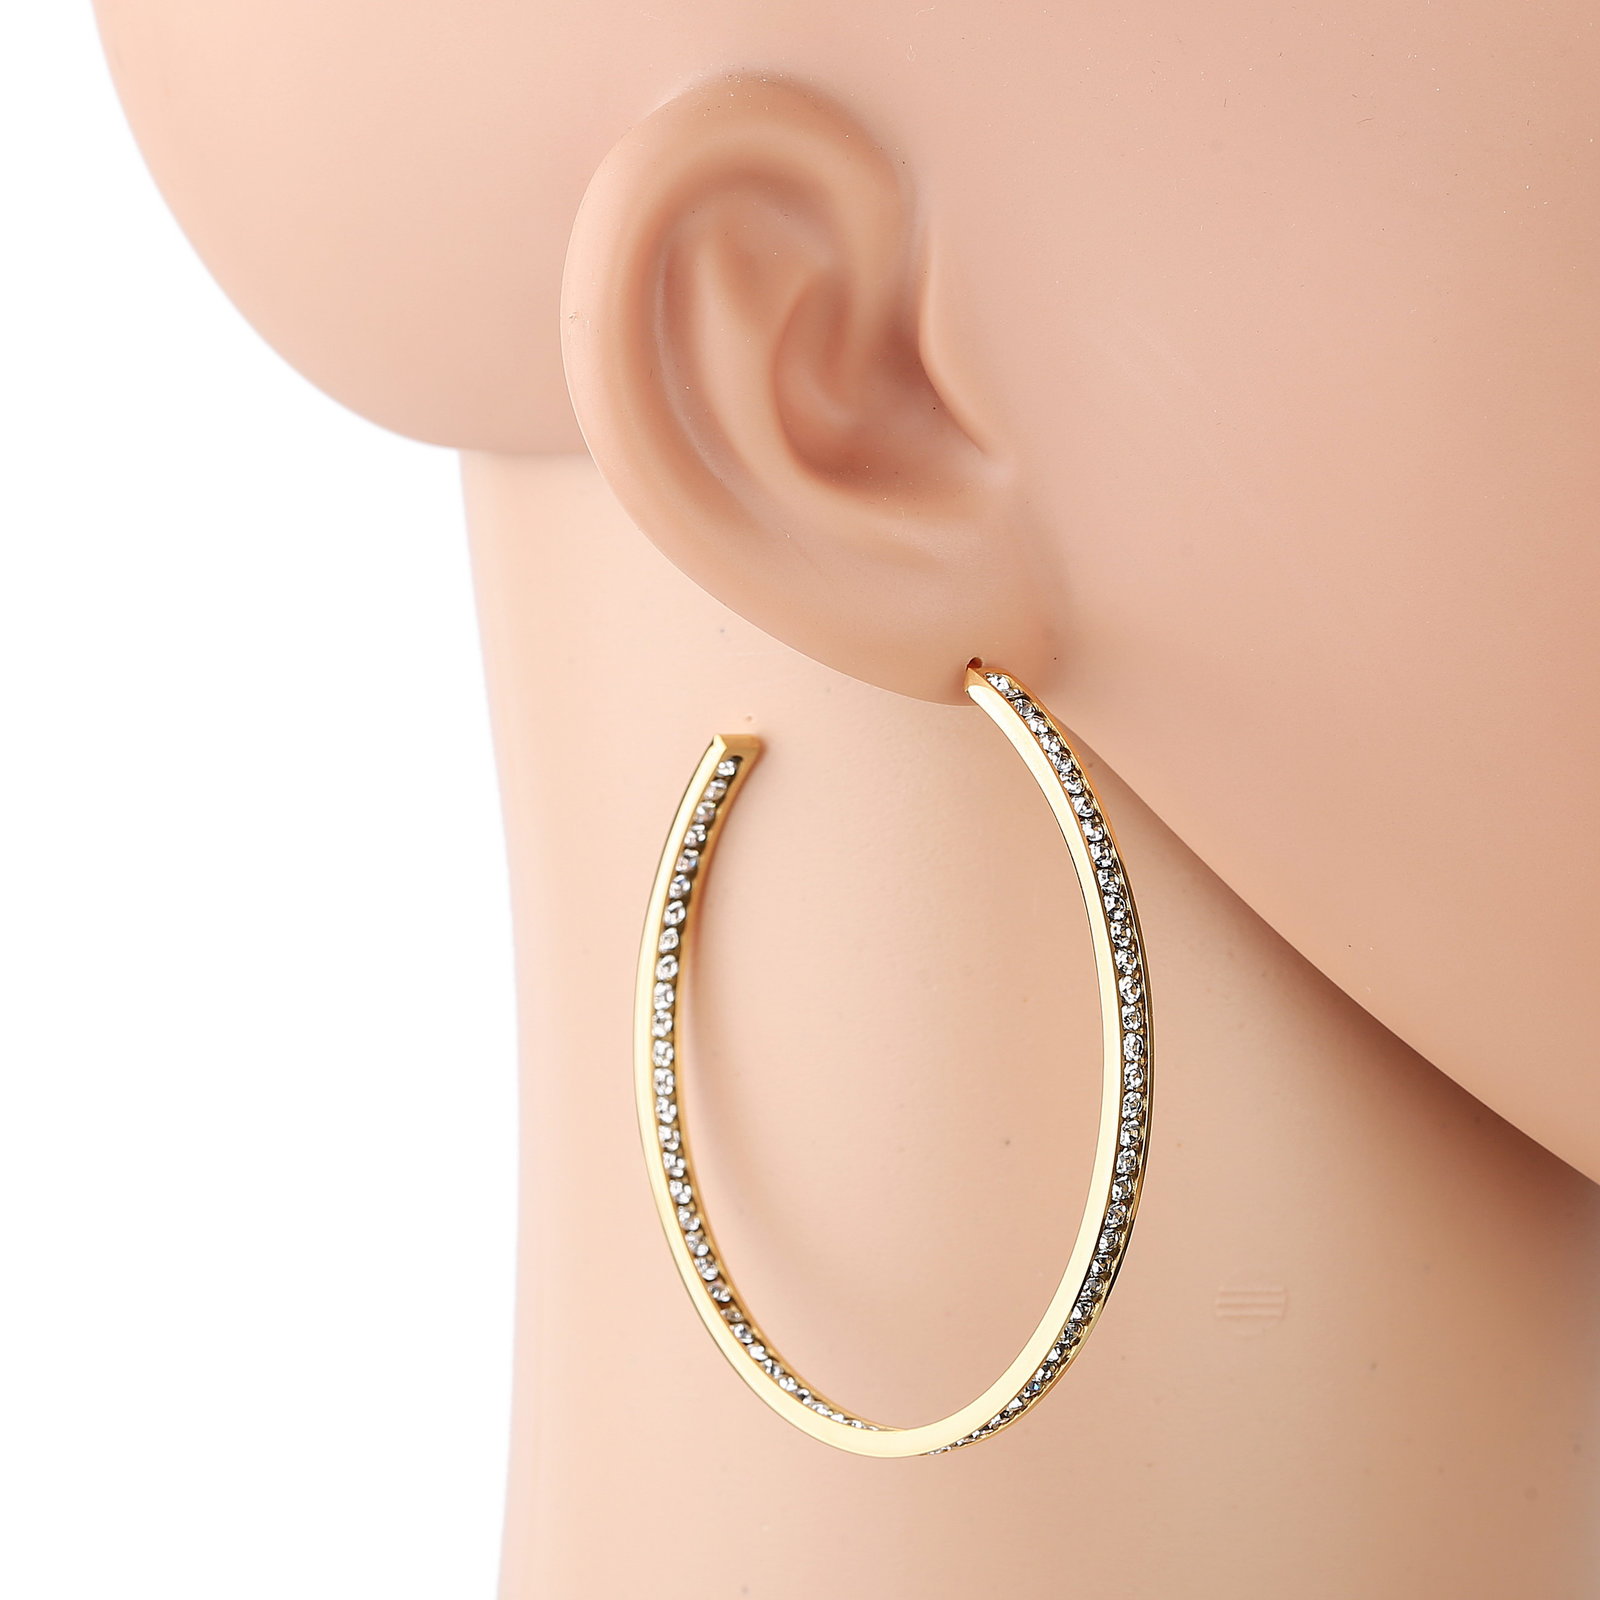 gold tone hoop earrings with sparkling swarovski style crystals